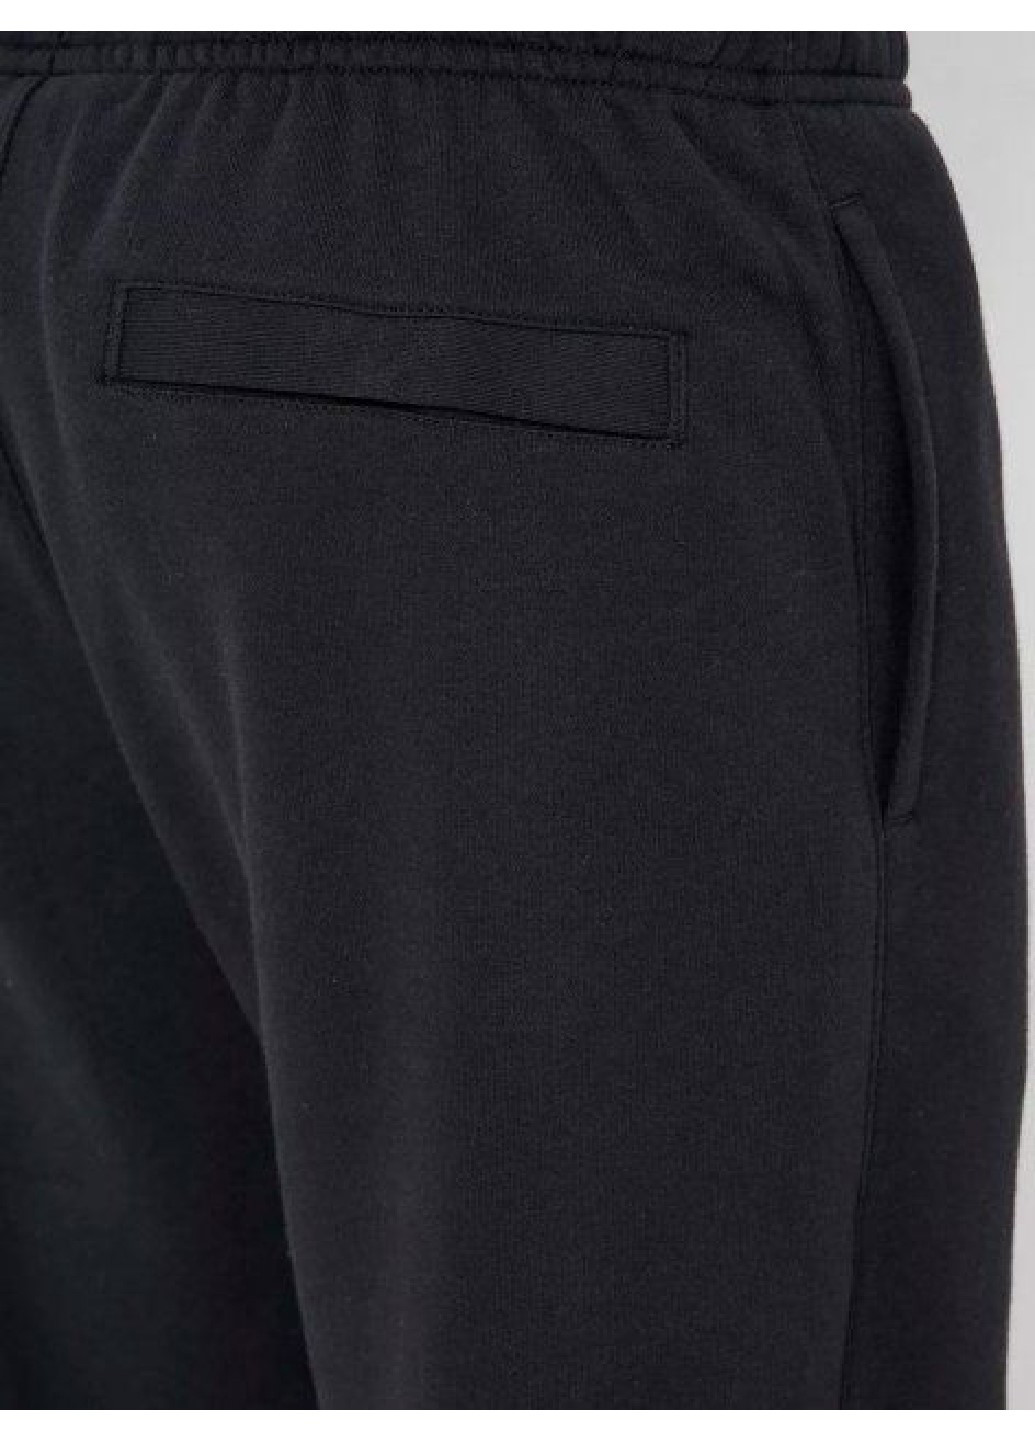 Штани BV2713-010_2024 Nike m nsw club pant oh ft (269697638)